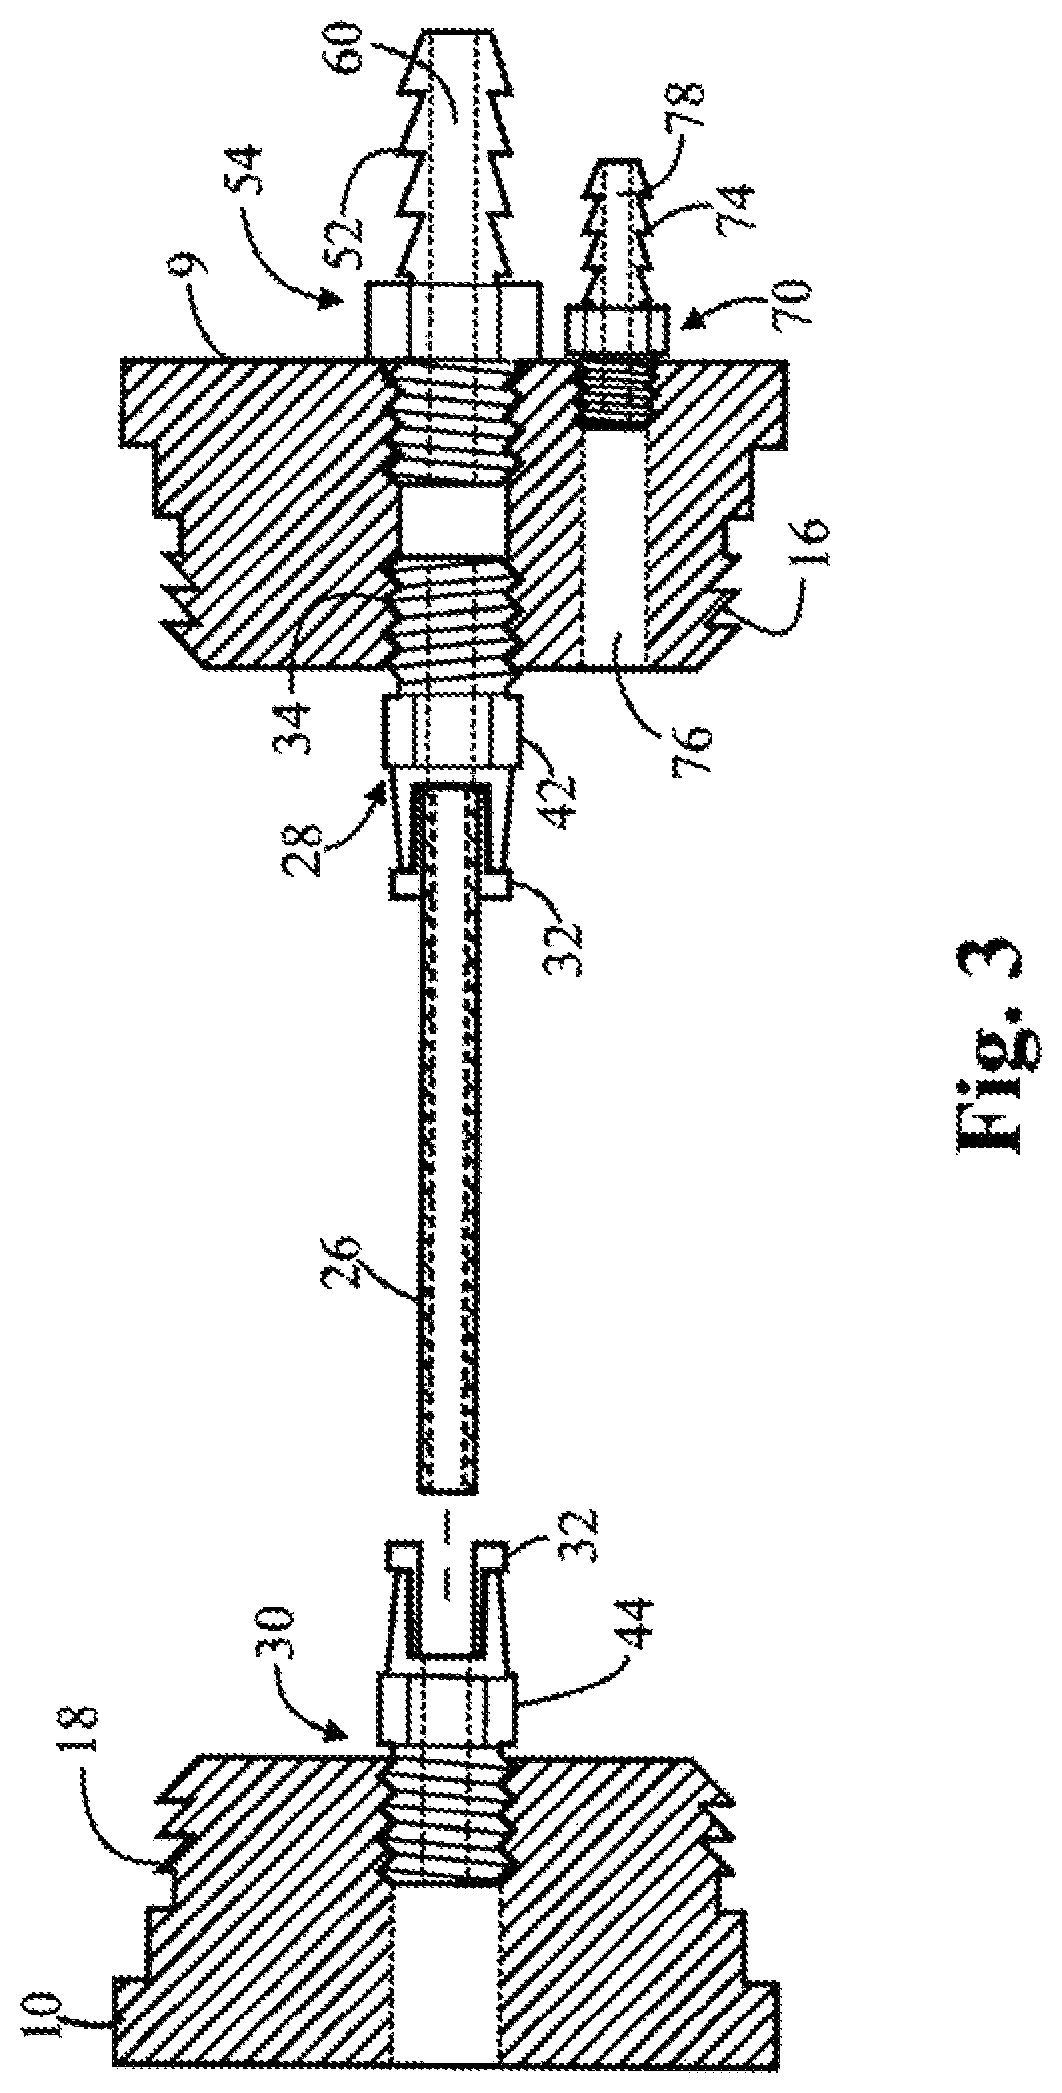 Flexible universal bladder tool for detecting leaks in a closed fluid system